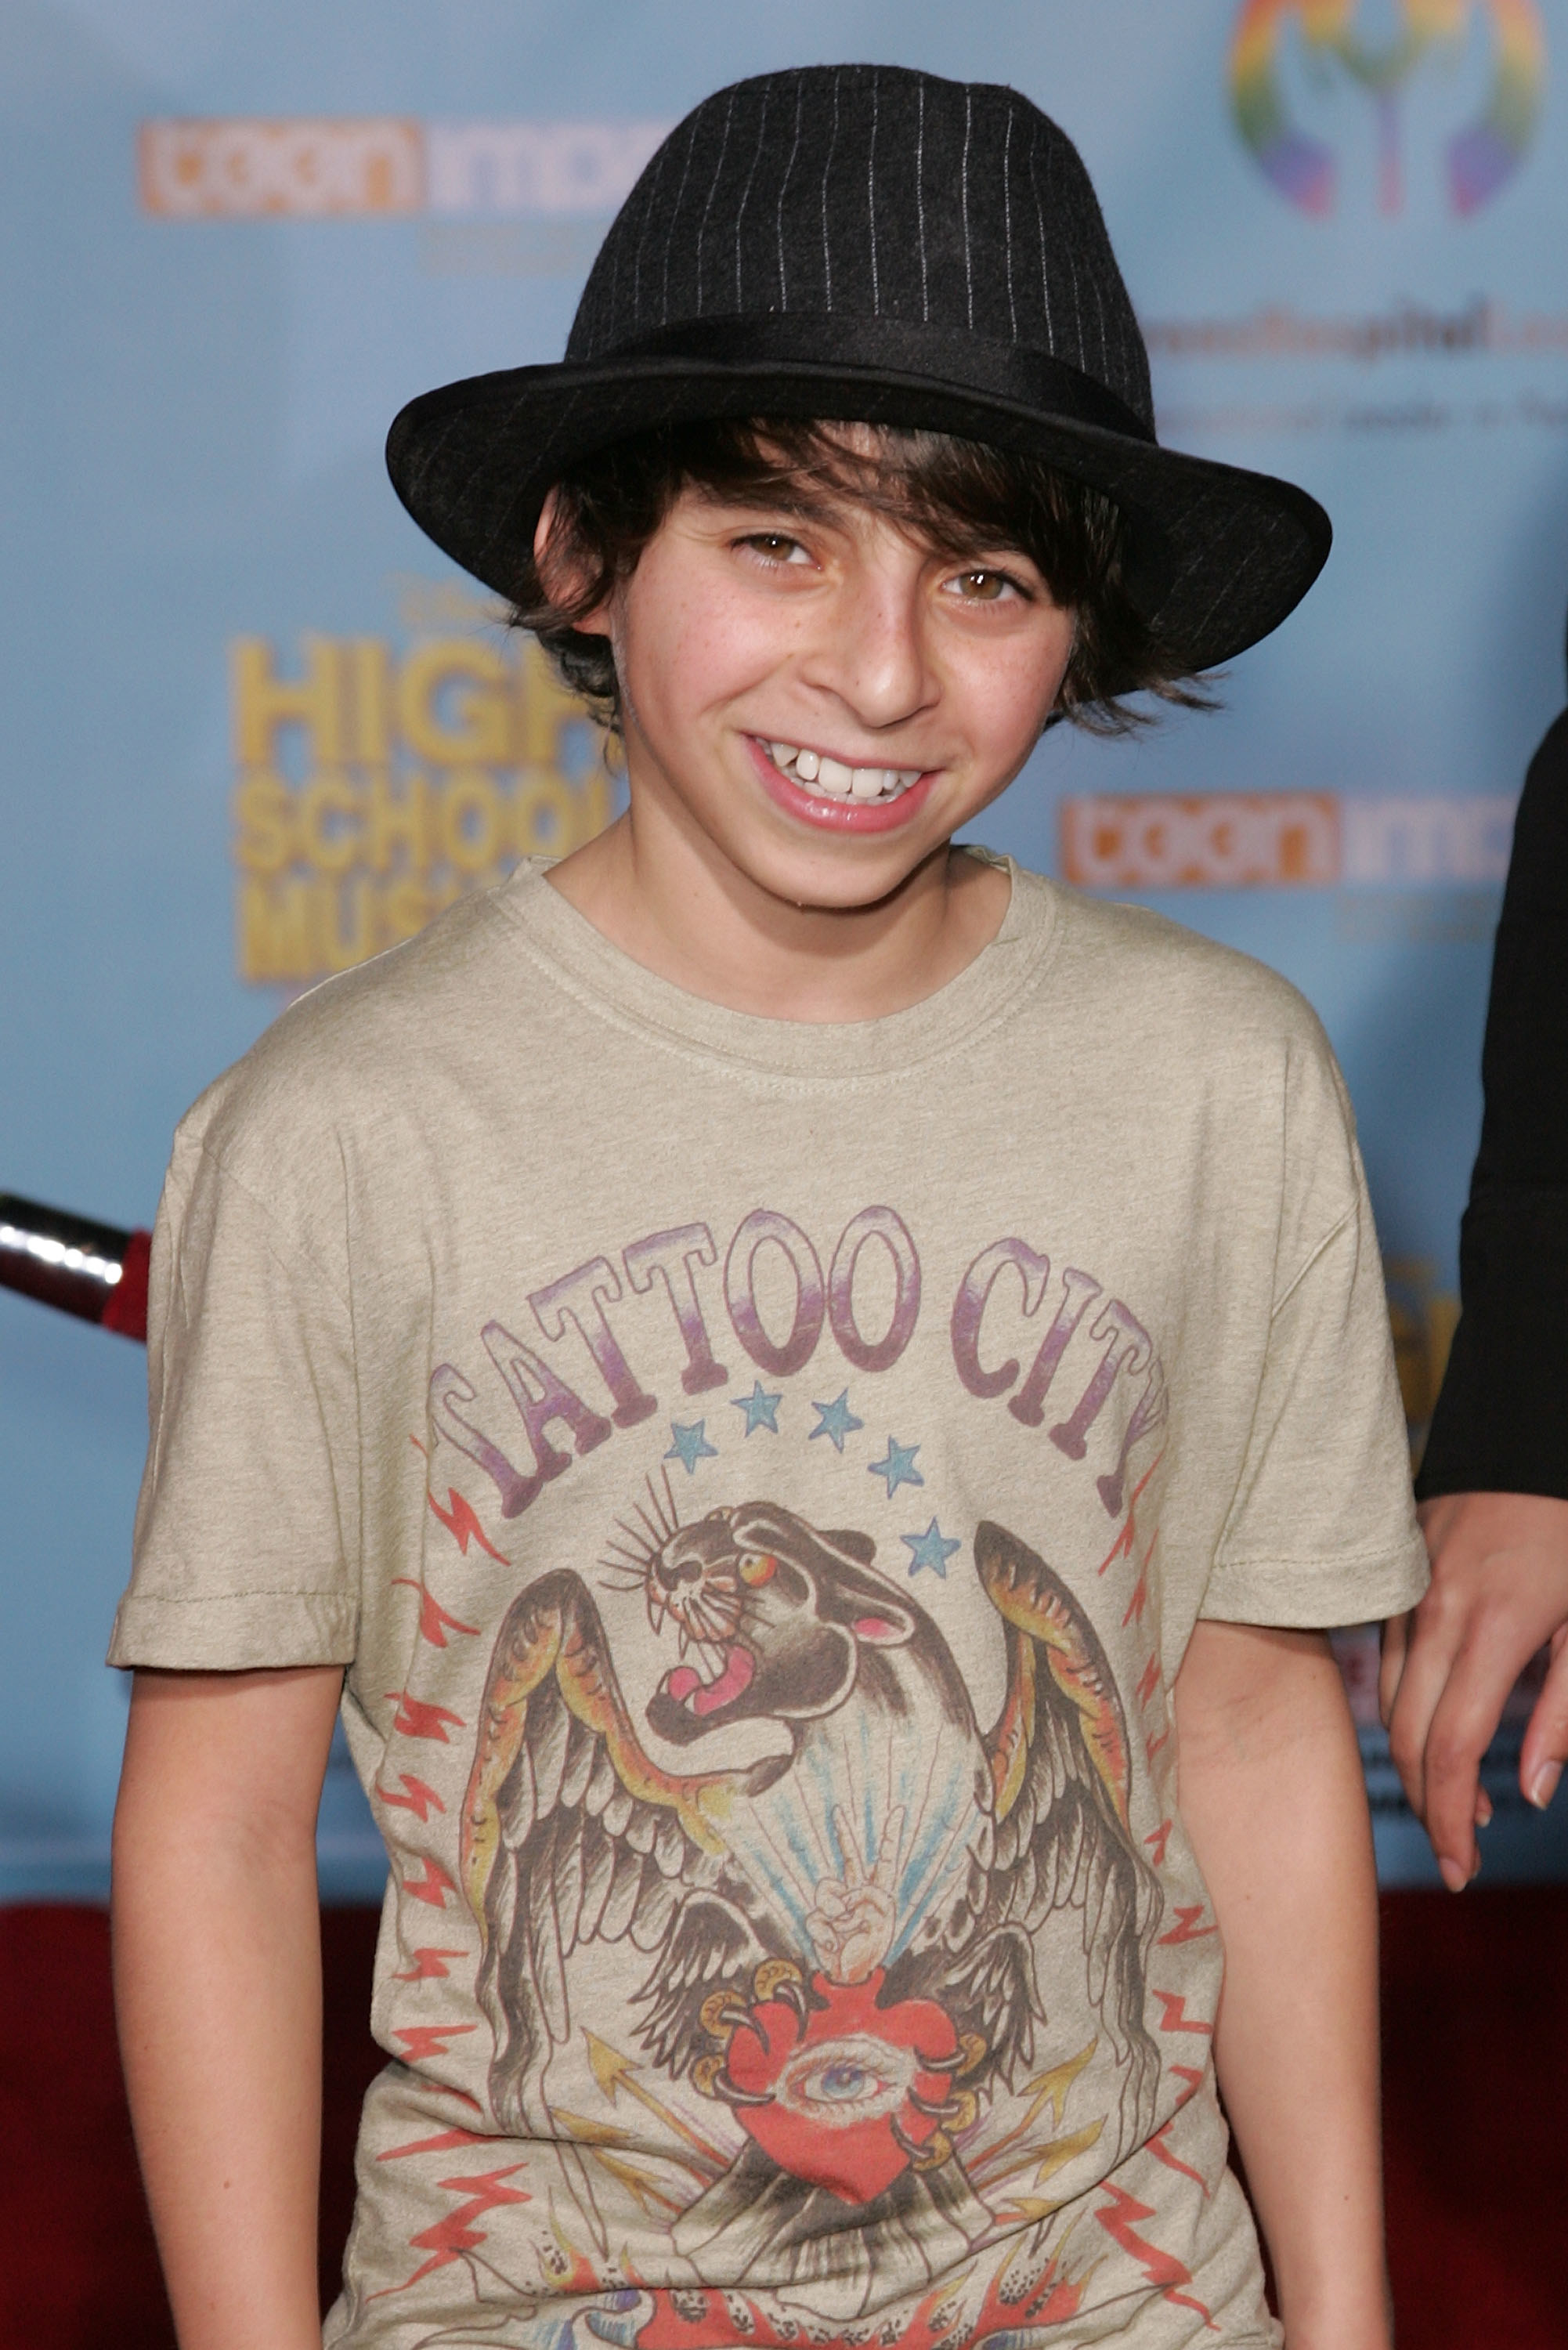 Moises Arias smiles at the &#x27;High School Musical 2&#x27; premiere on November 19, 2007